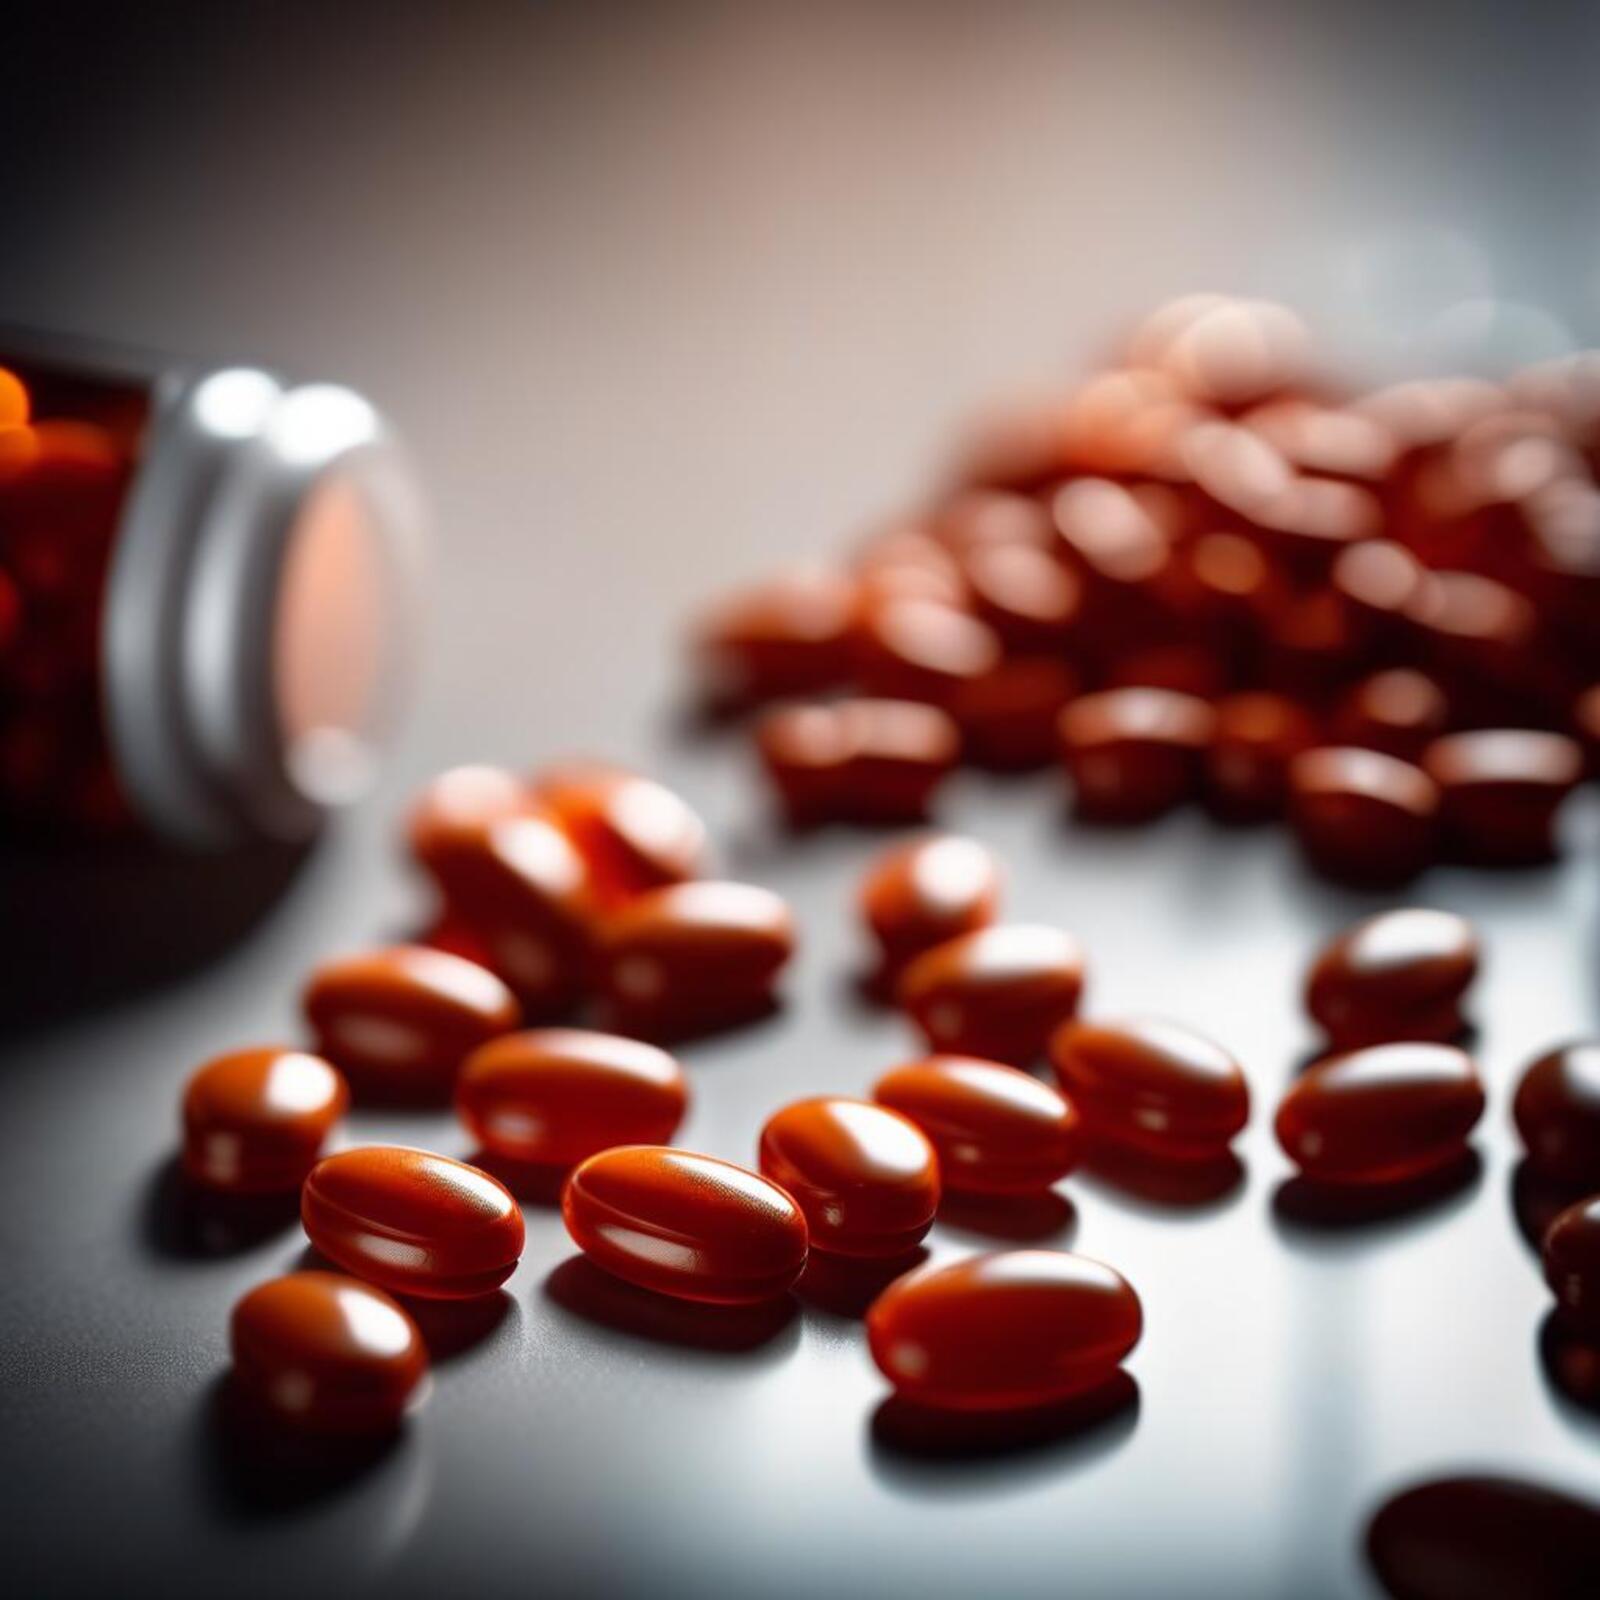 Can I Take Meloxicam With Ibuprofen?